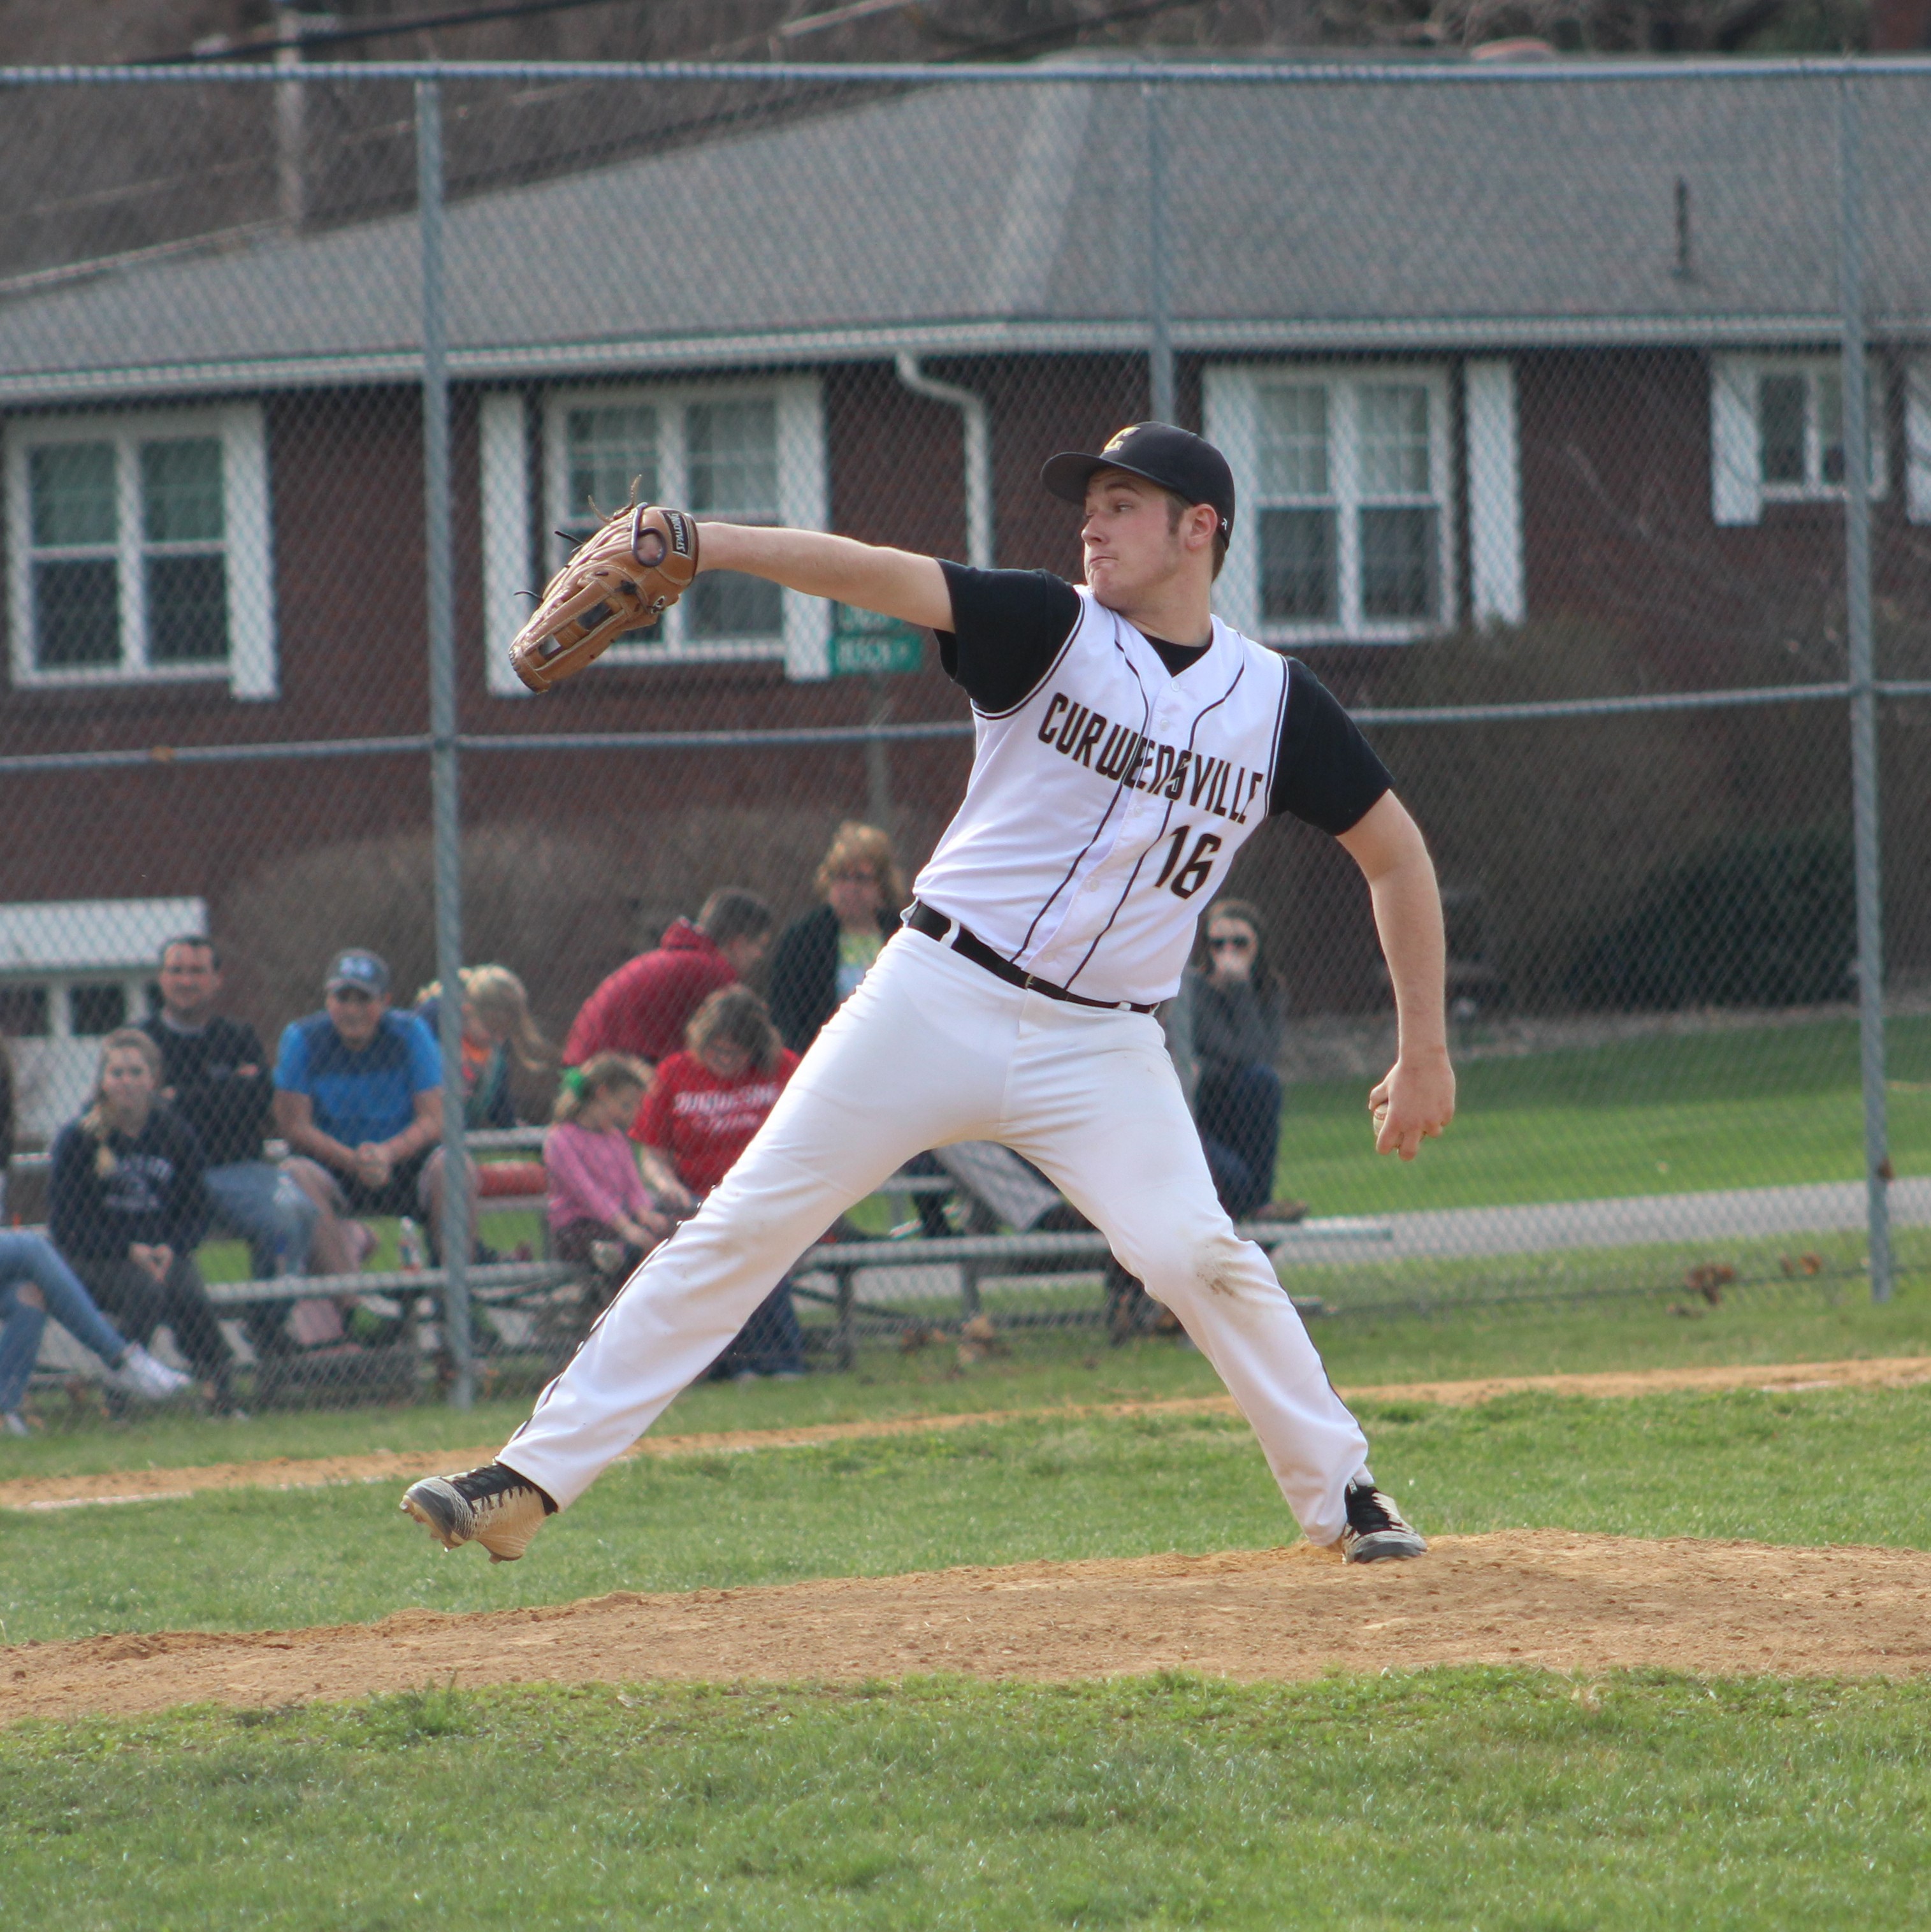 Austin Lansberry got his first start of the year against Johnsonburg, pitching three innings.